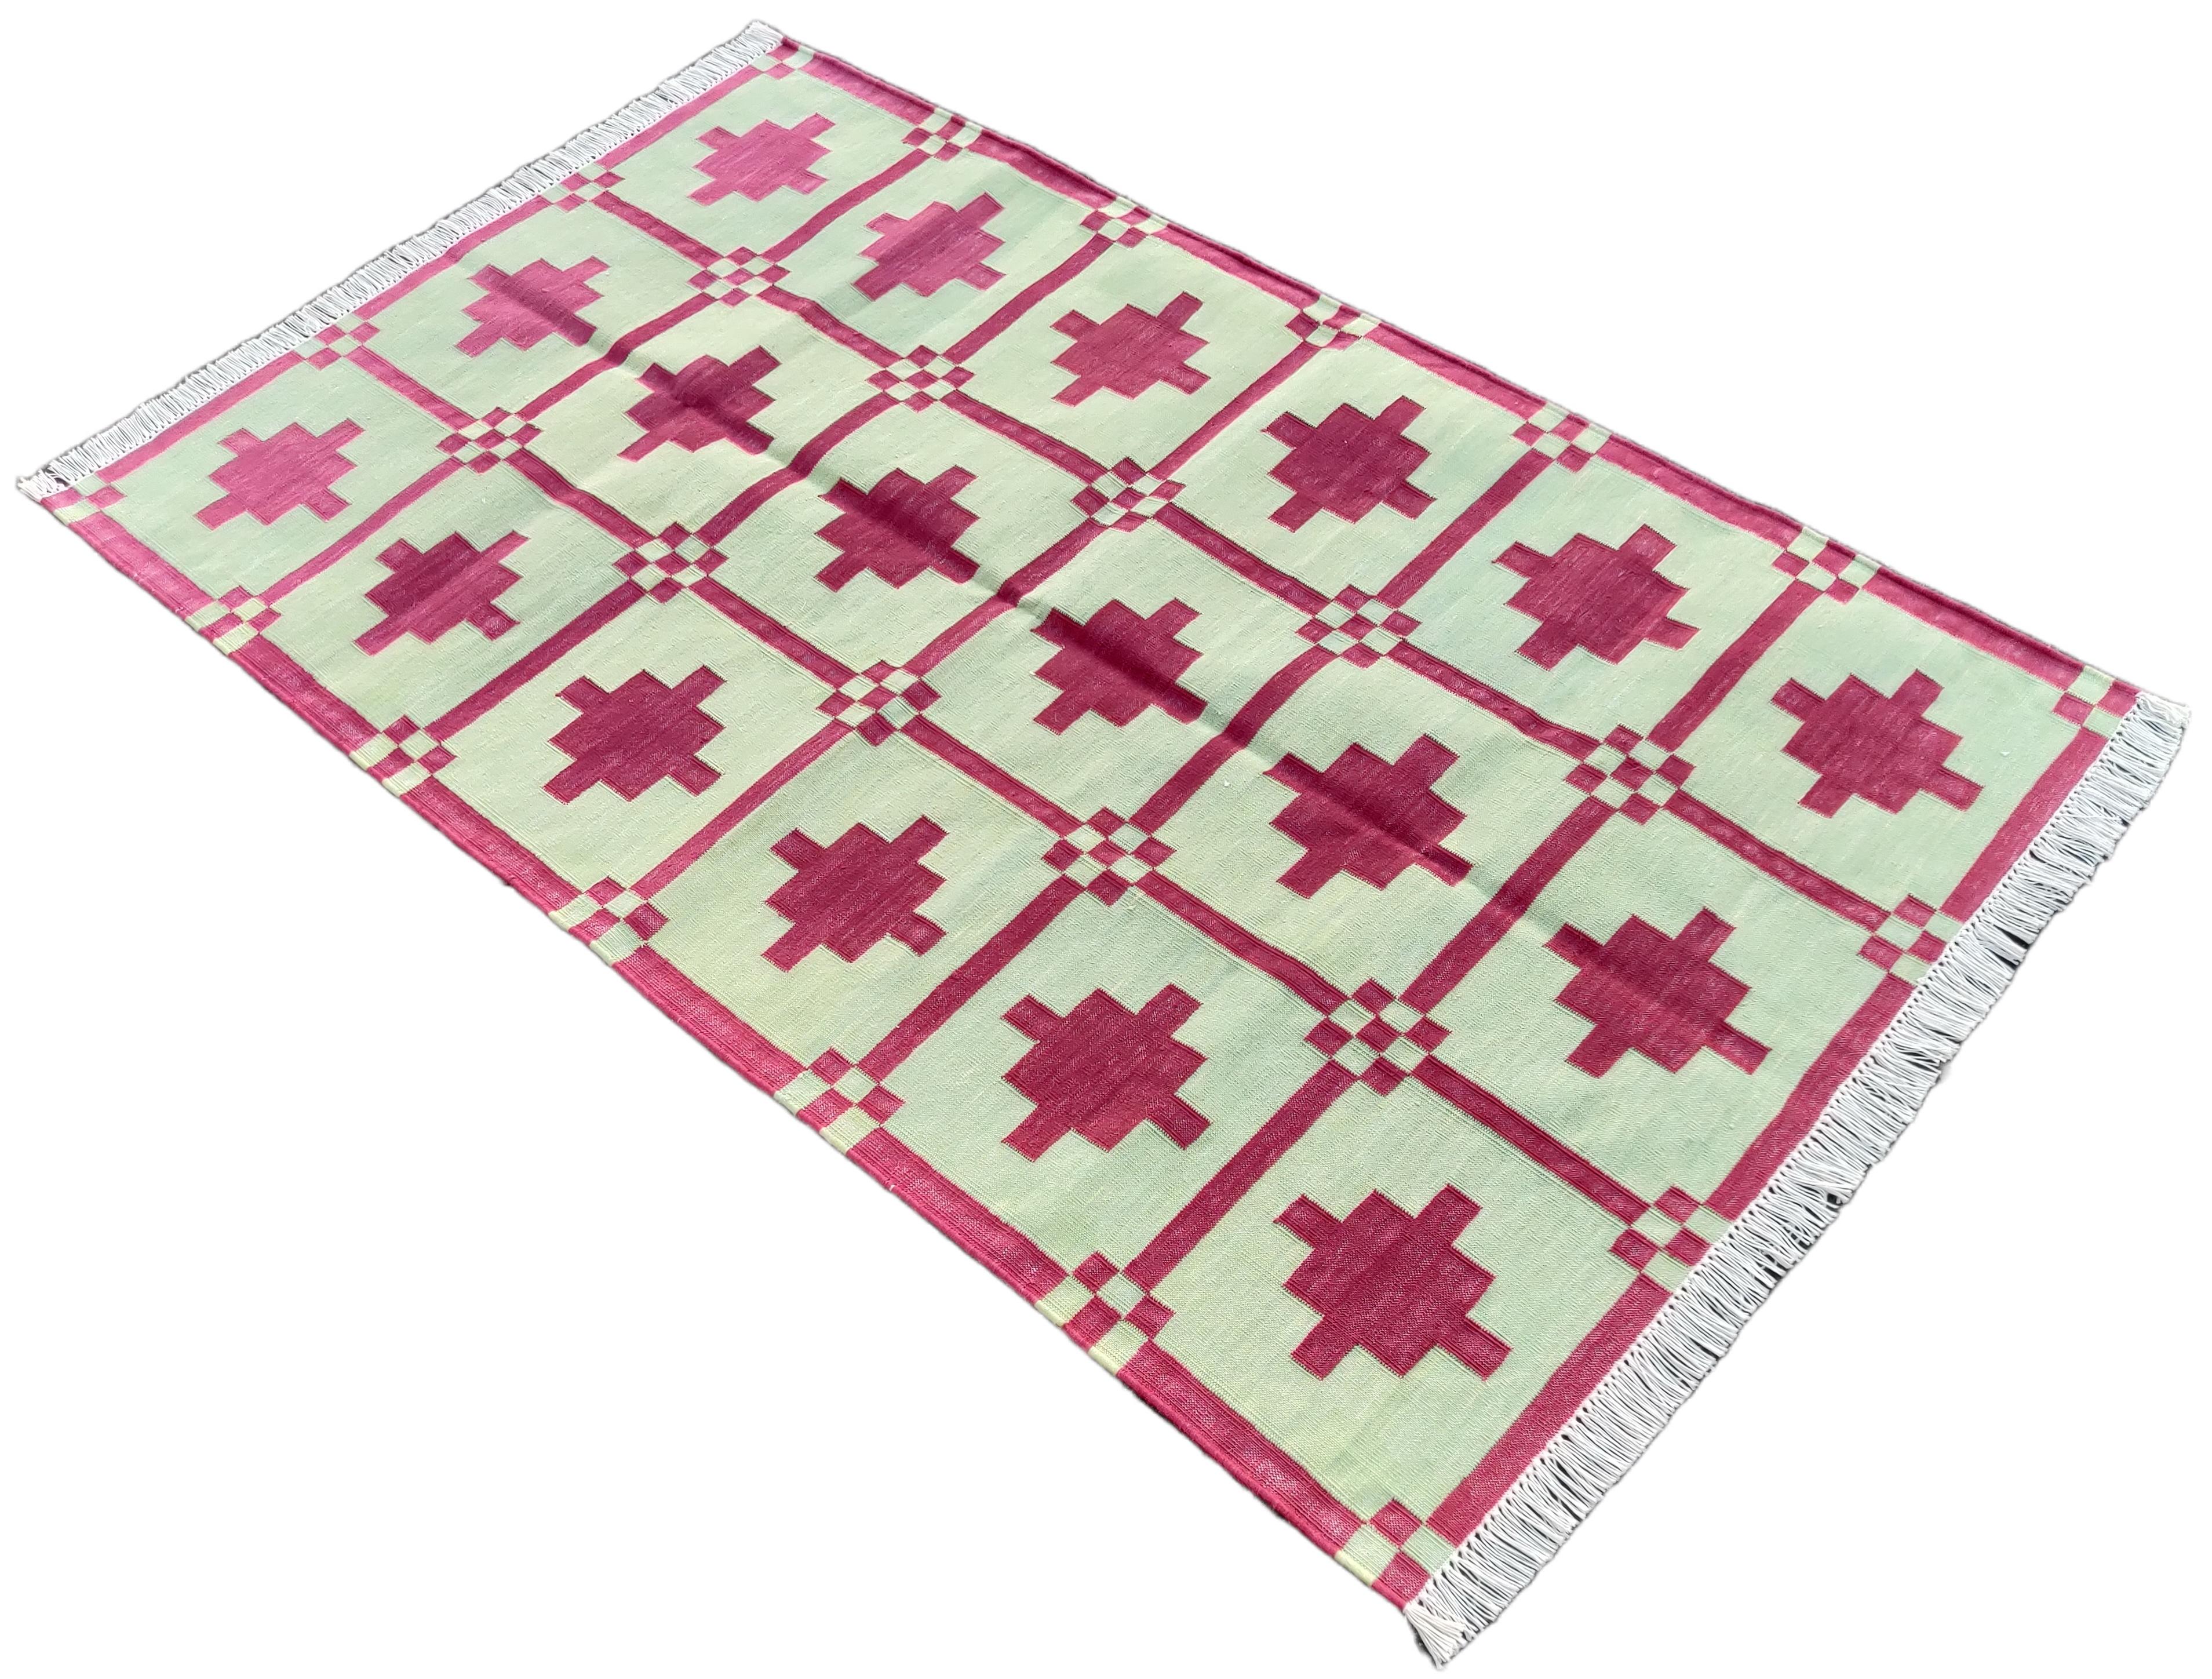 Cotton Vegetable Dyed Light Green And Pink Star Patterned Indian Dhurrie Rug-36